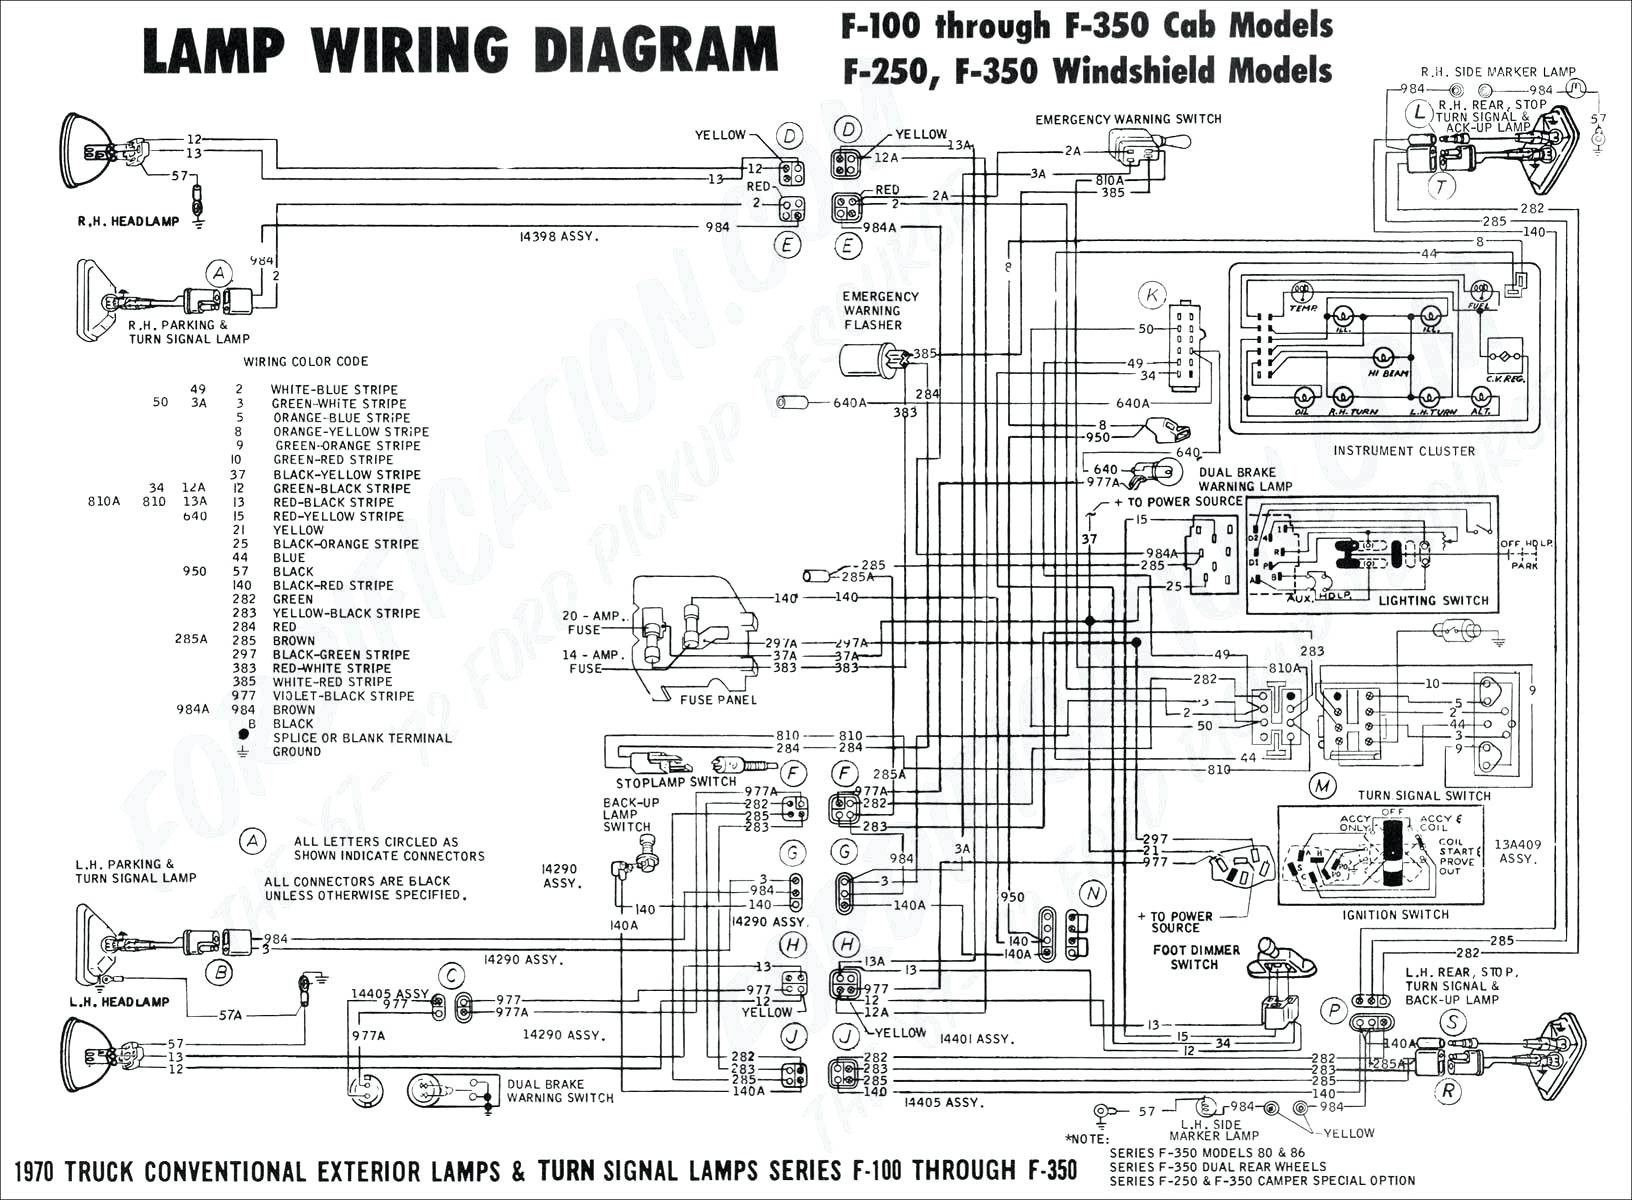 ford trailer wiring diagram Collection Wiring Diagram Trailer Lights Ireland Valid ford F250 Wiring Diagram DOWNLOAD Wiring Diagram